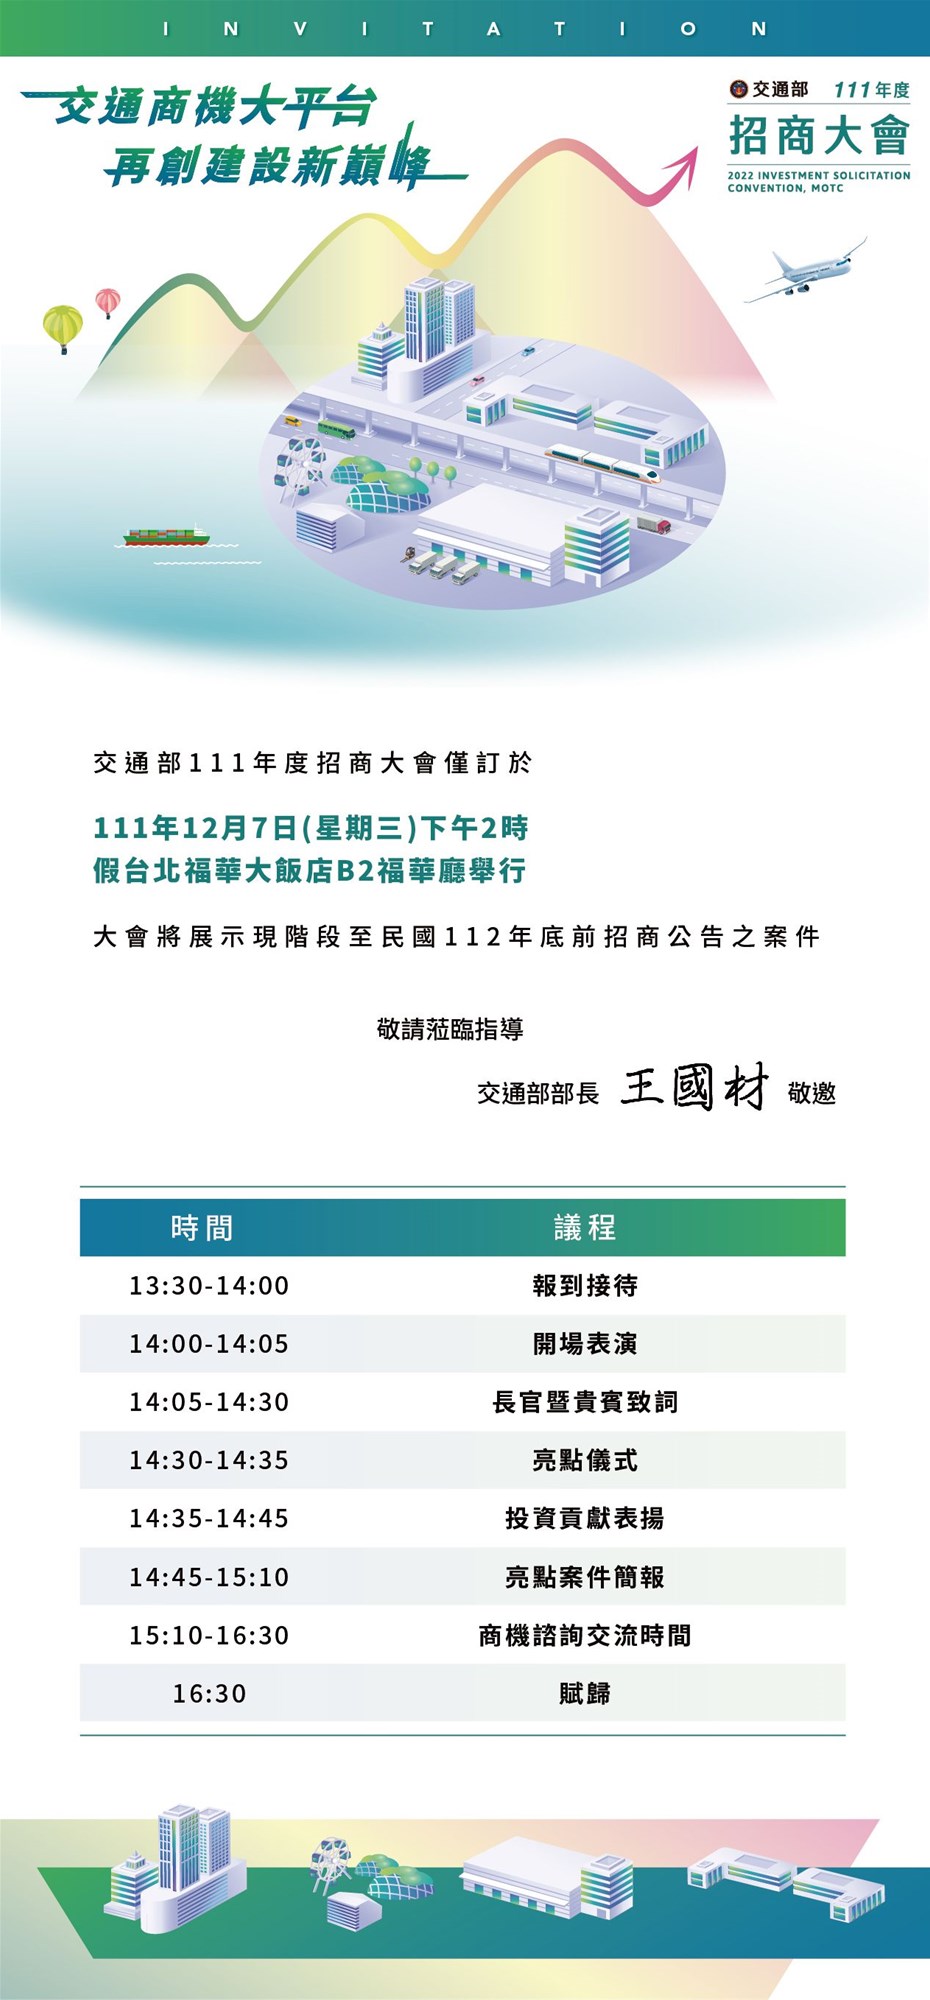 111 Annual Investment Promotion Conference of the Ministry of Communications